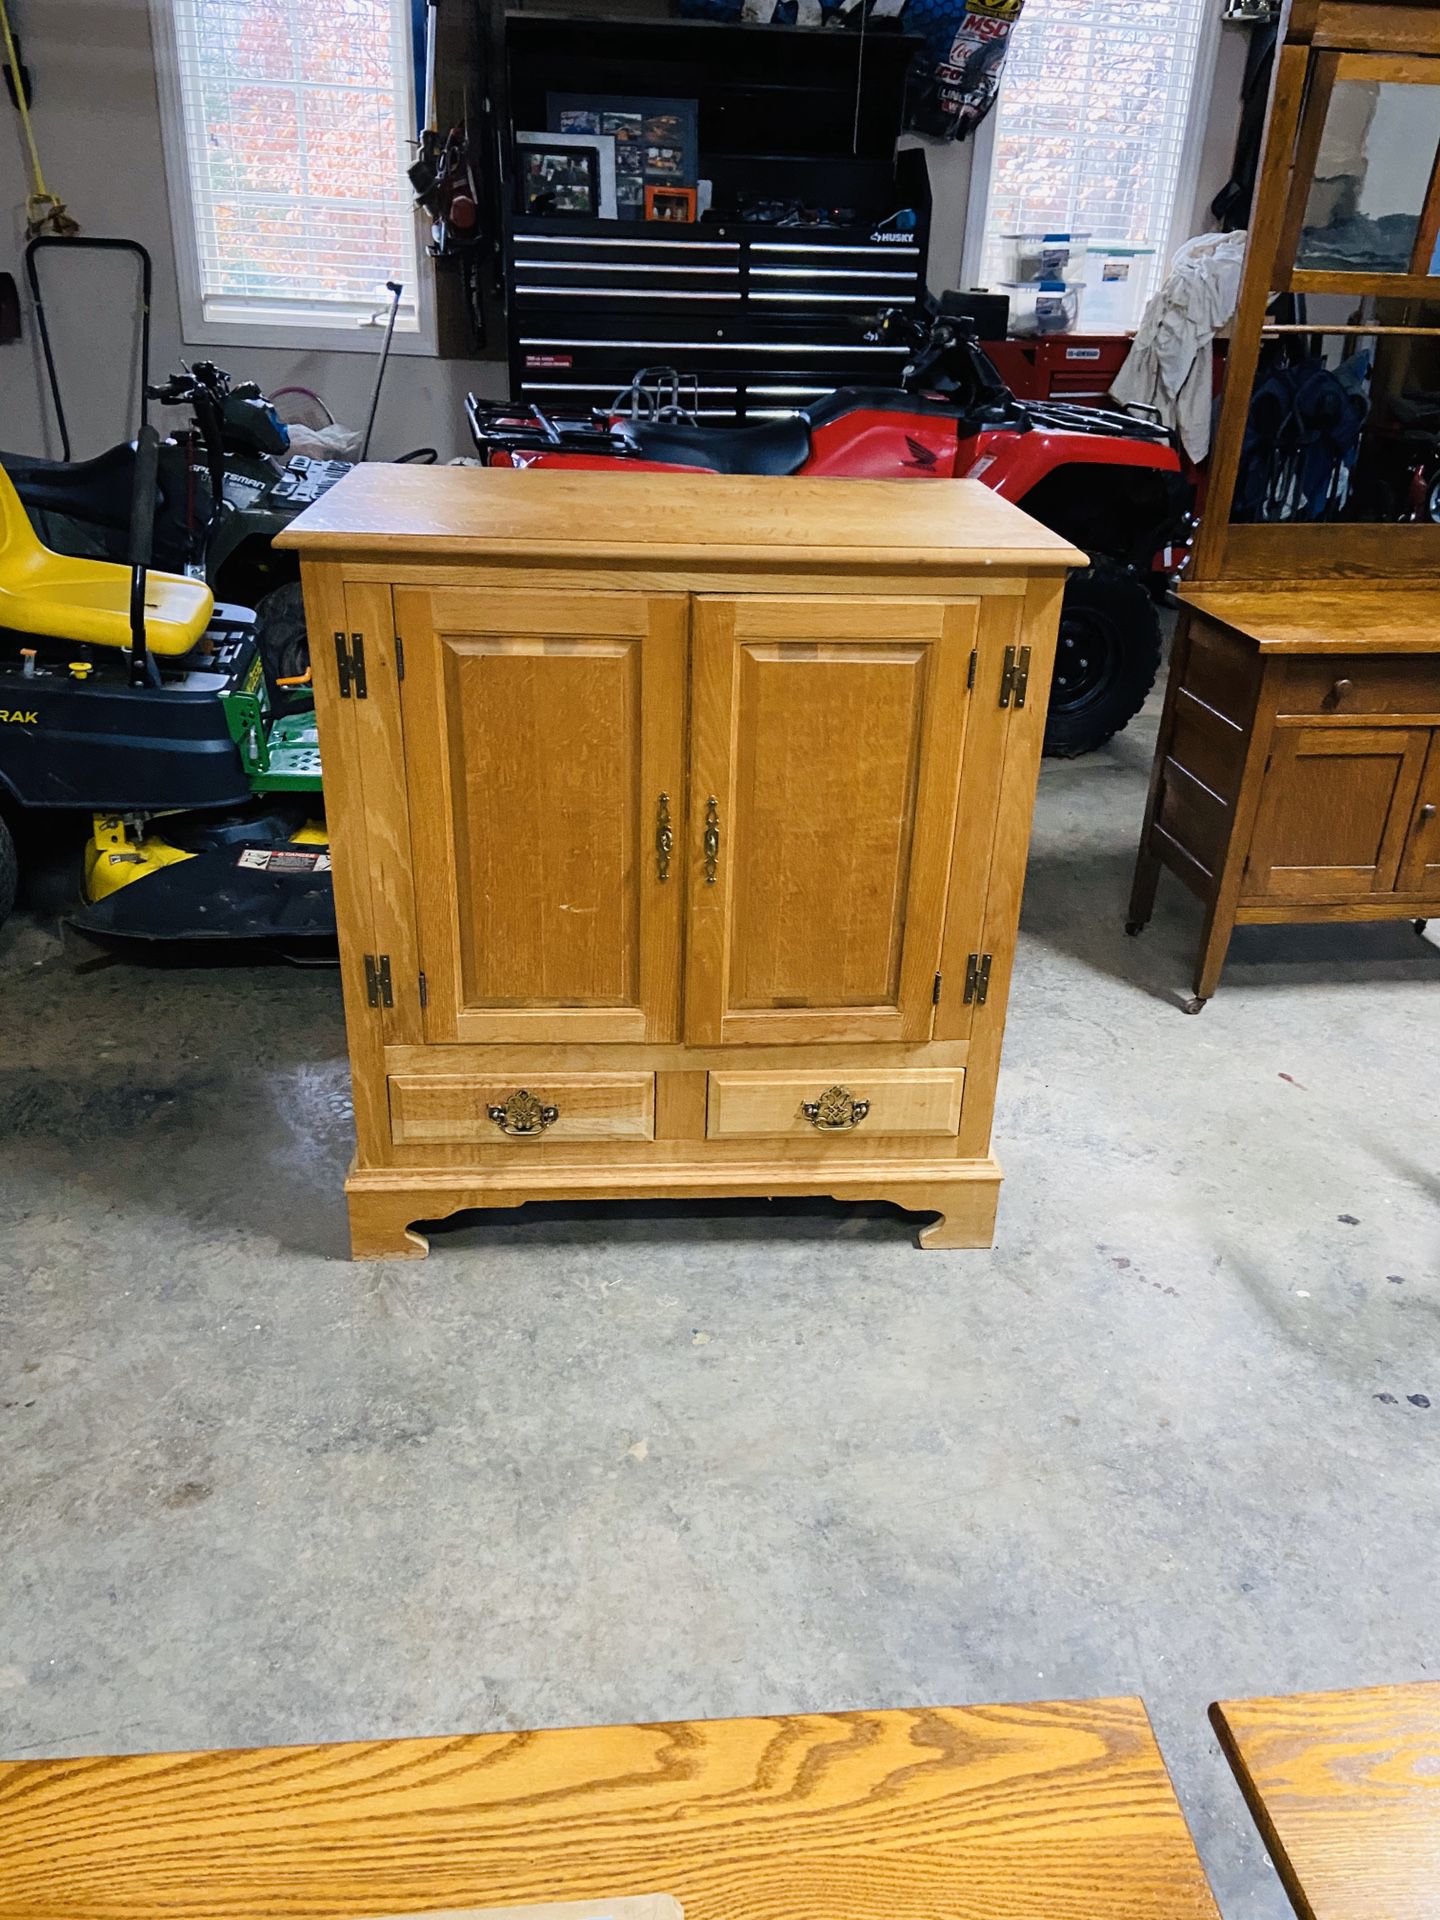 Small Cabinet for Entry way or Books . Has a few a few Discoloration spots on top.It has an opening in back but comes shelves.